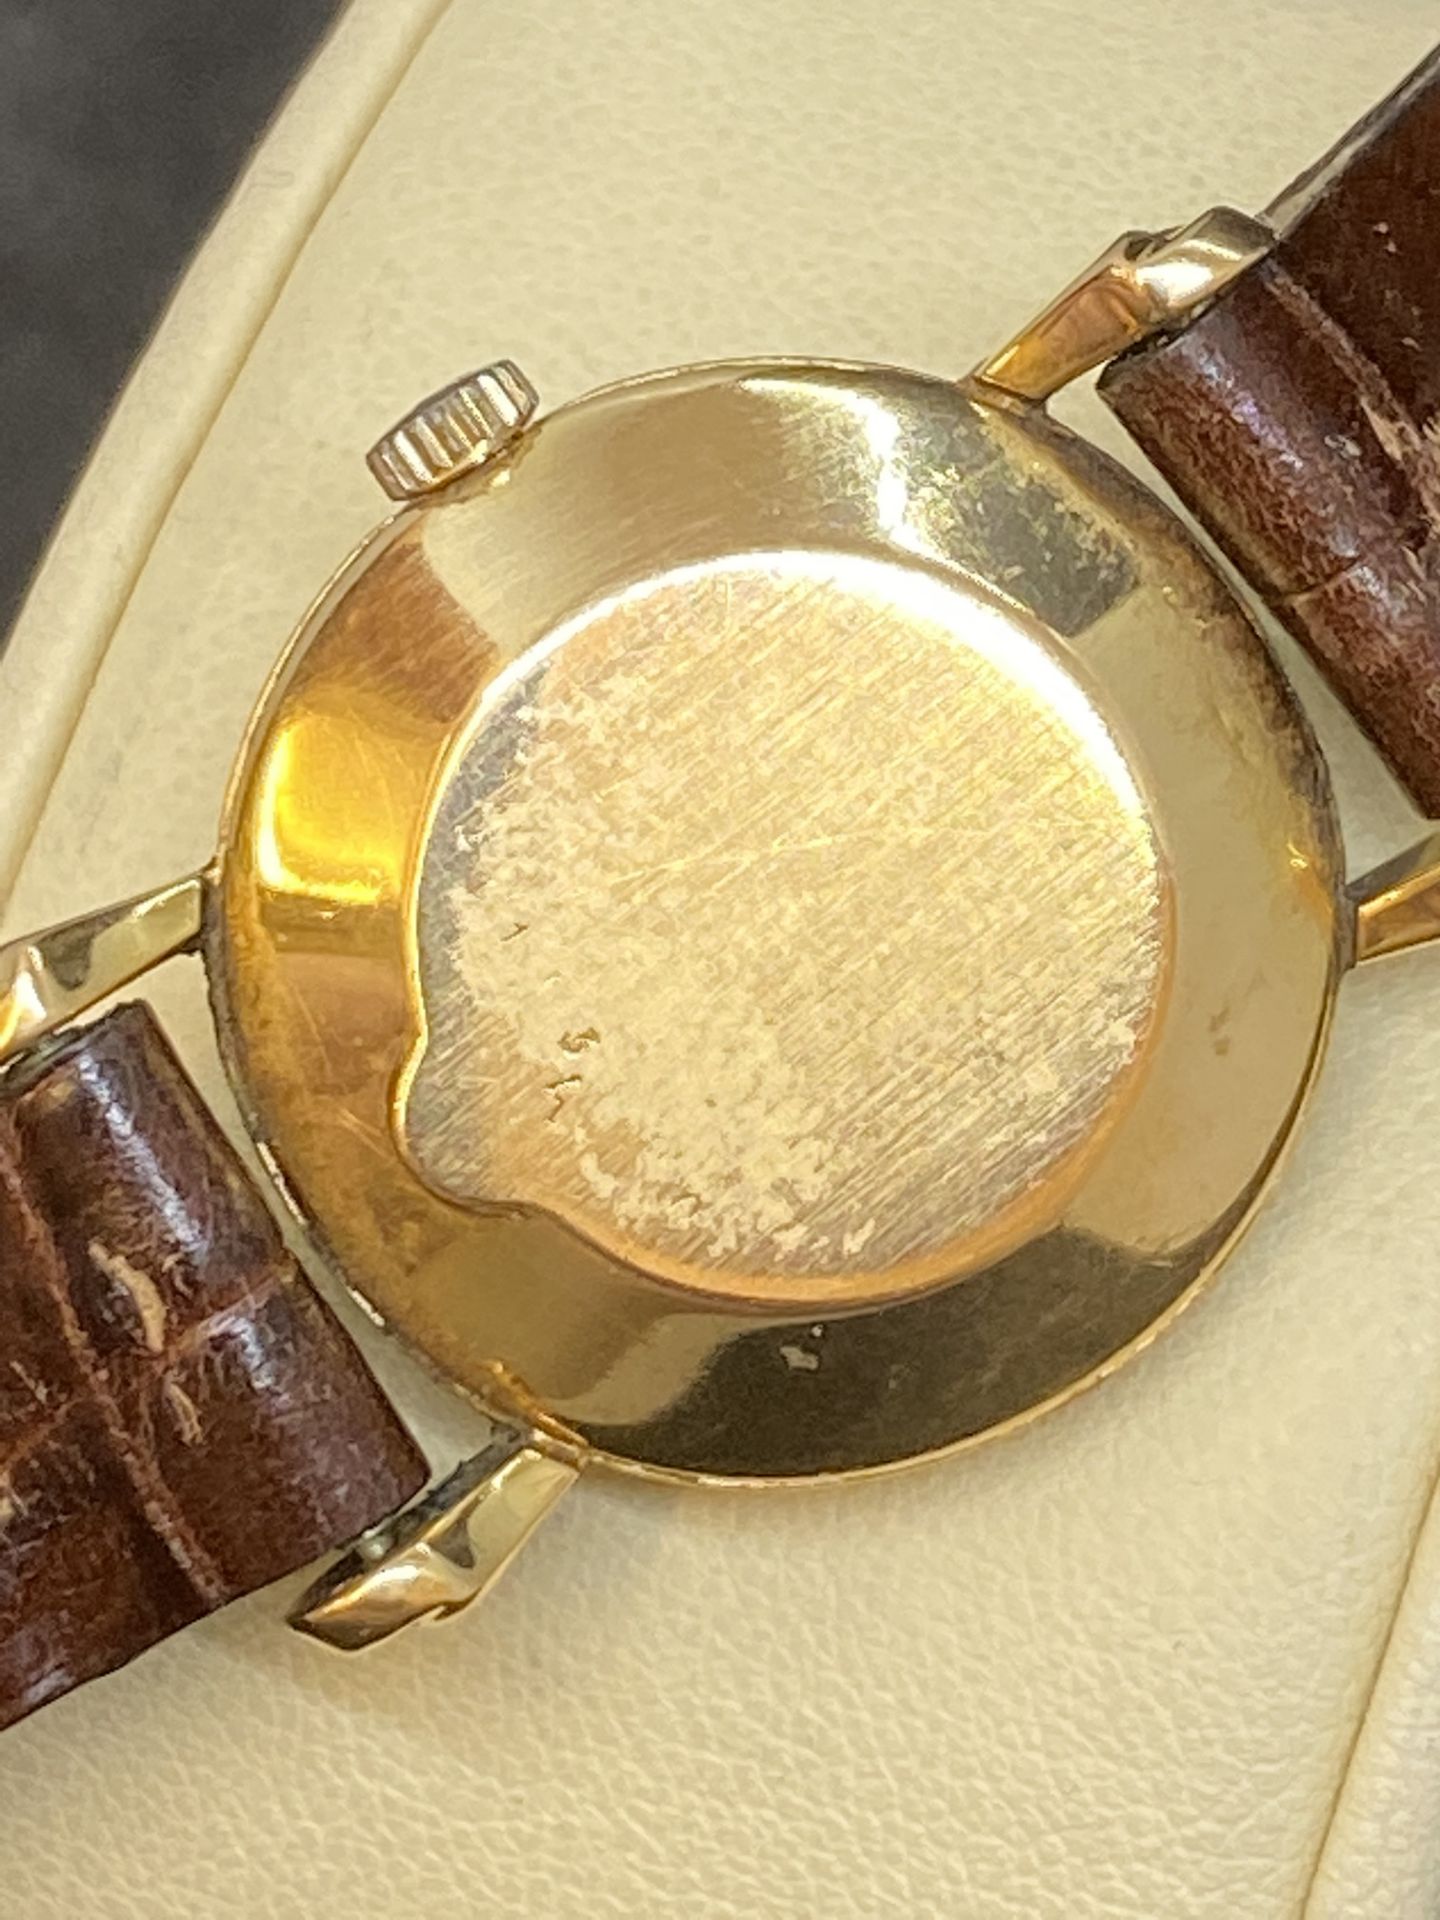 JAEGER LECOULTRE 18ct GOLD WATCH - Image 6 of 9